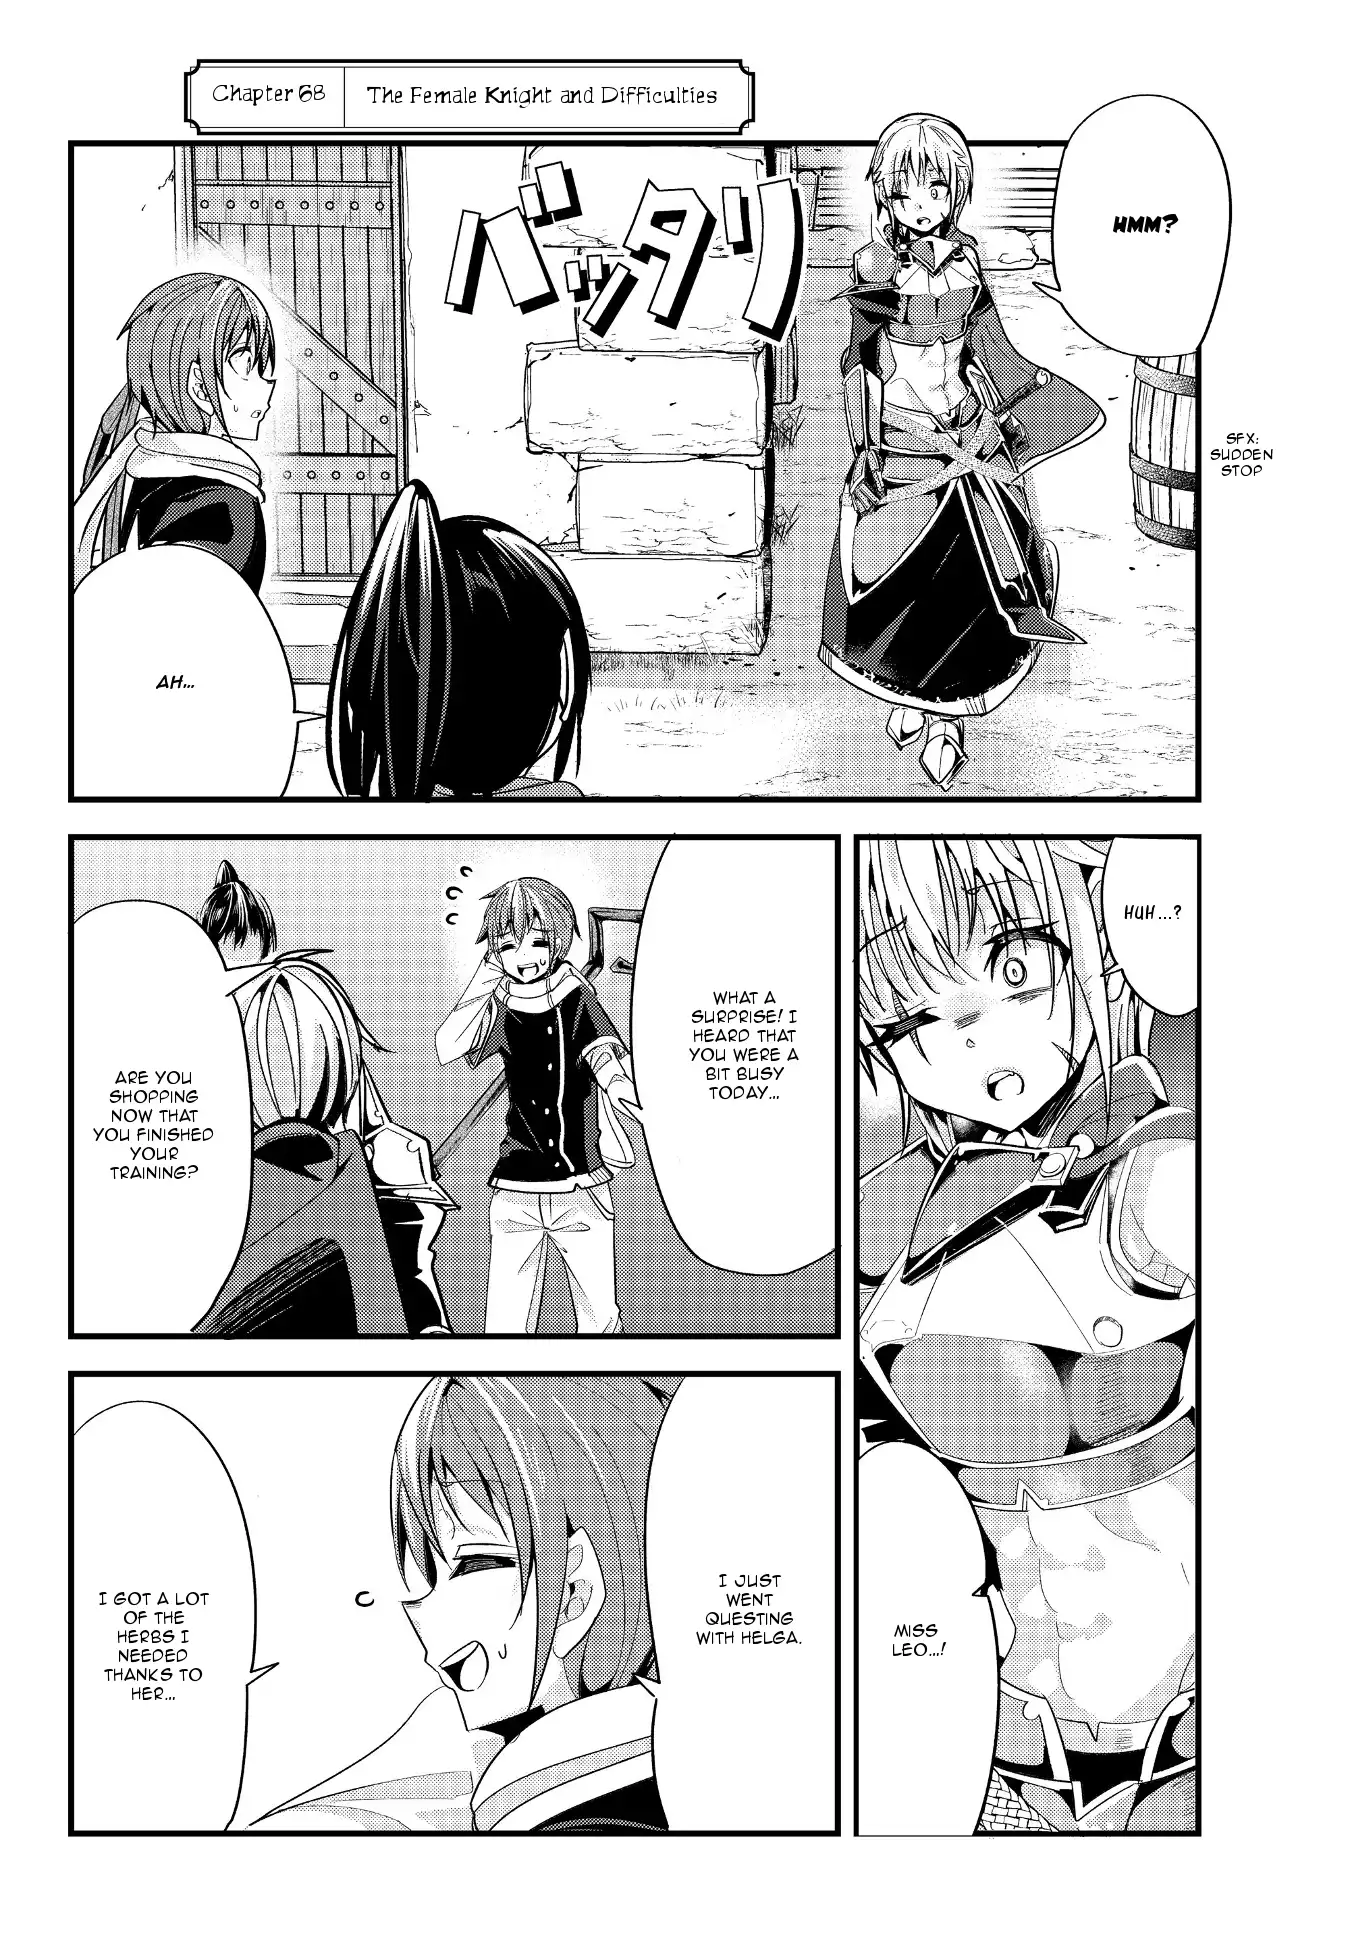 A Story About Treating a Female Knight, Who Has Never Been Treated as a Woman, as a Woman - Chapter 68 Page 2